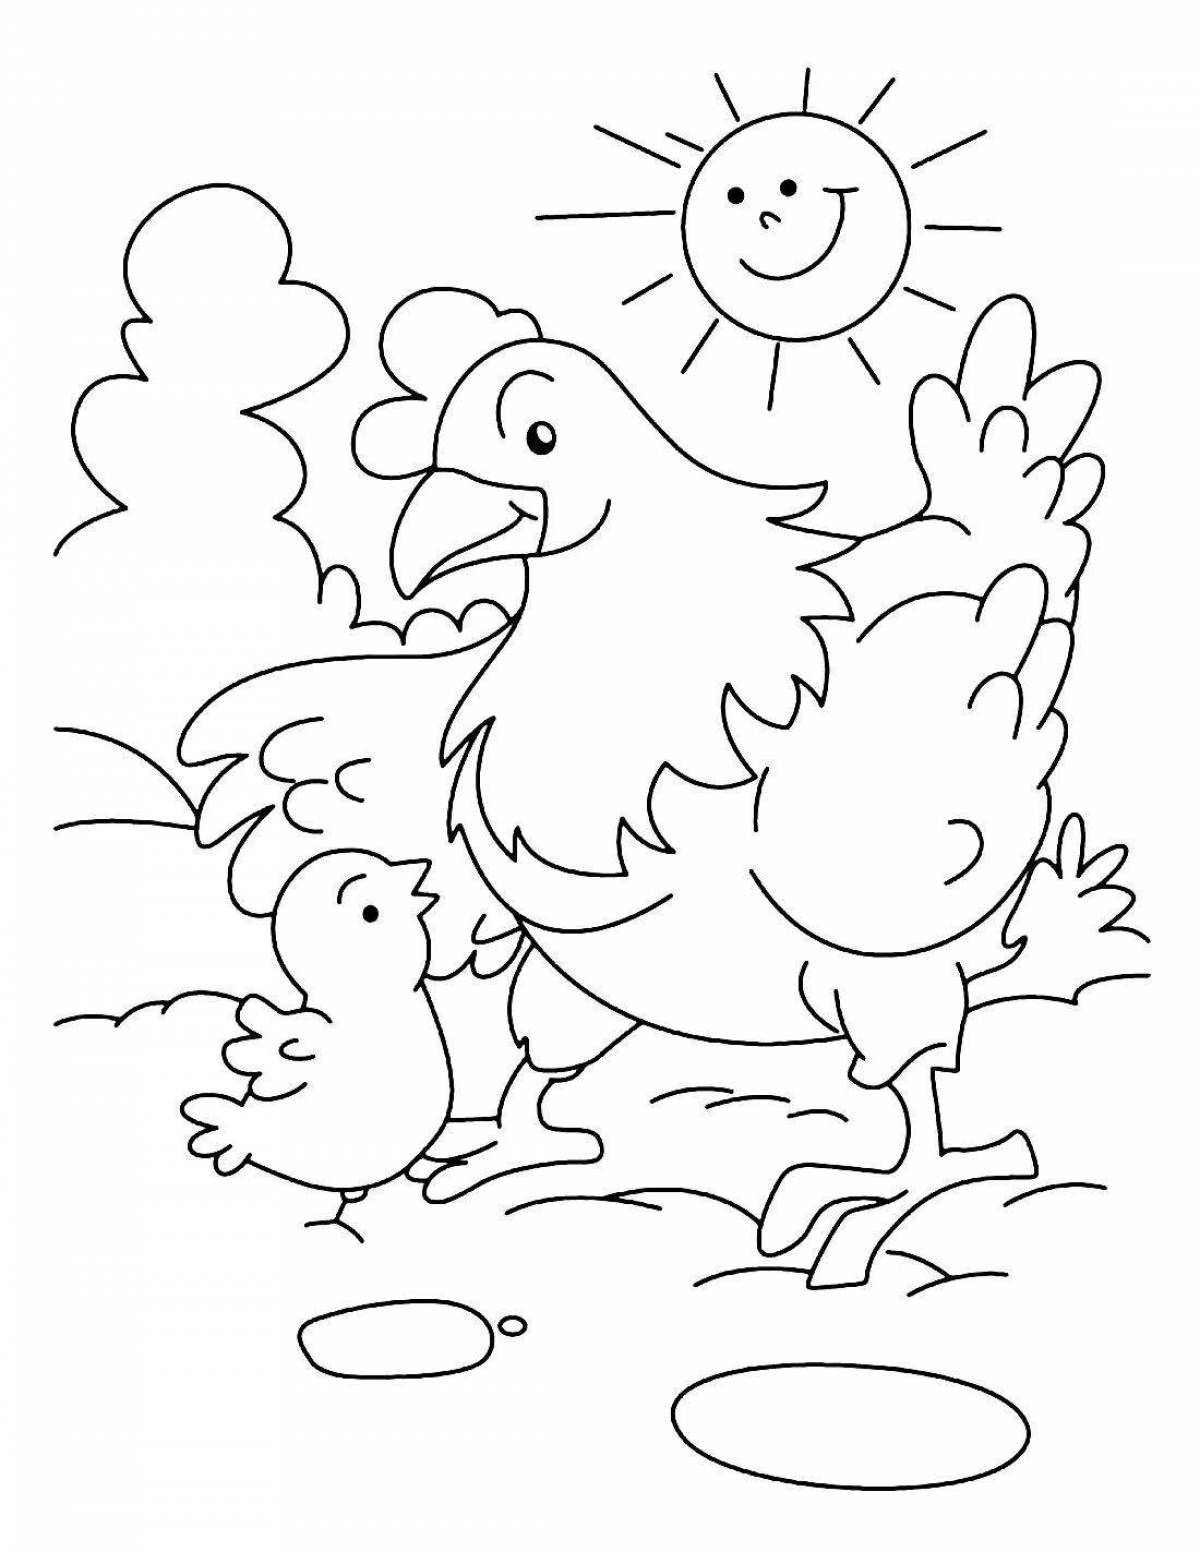 Wonderful poultry coloring page for 5-6 year olds